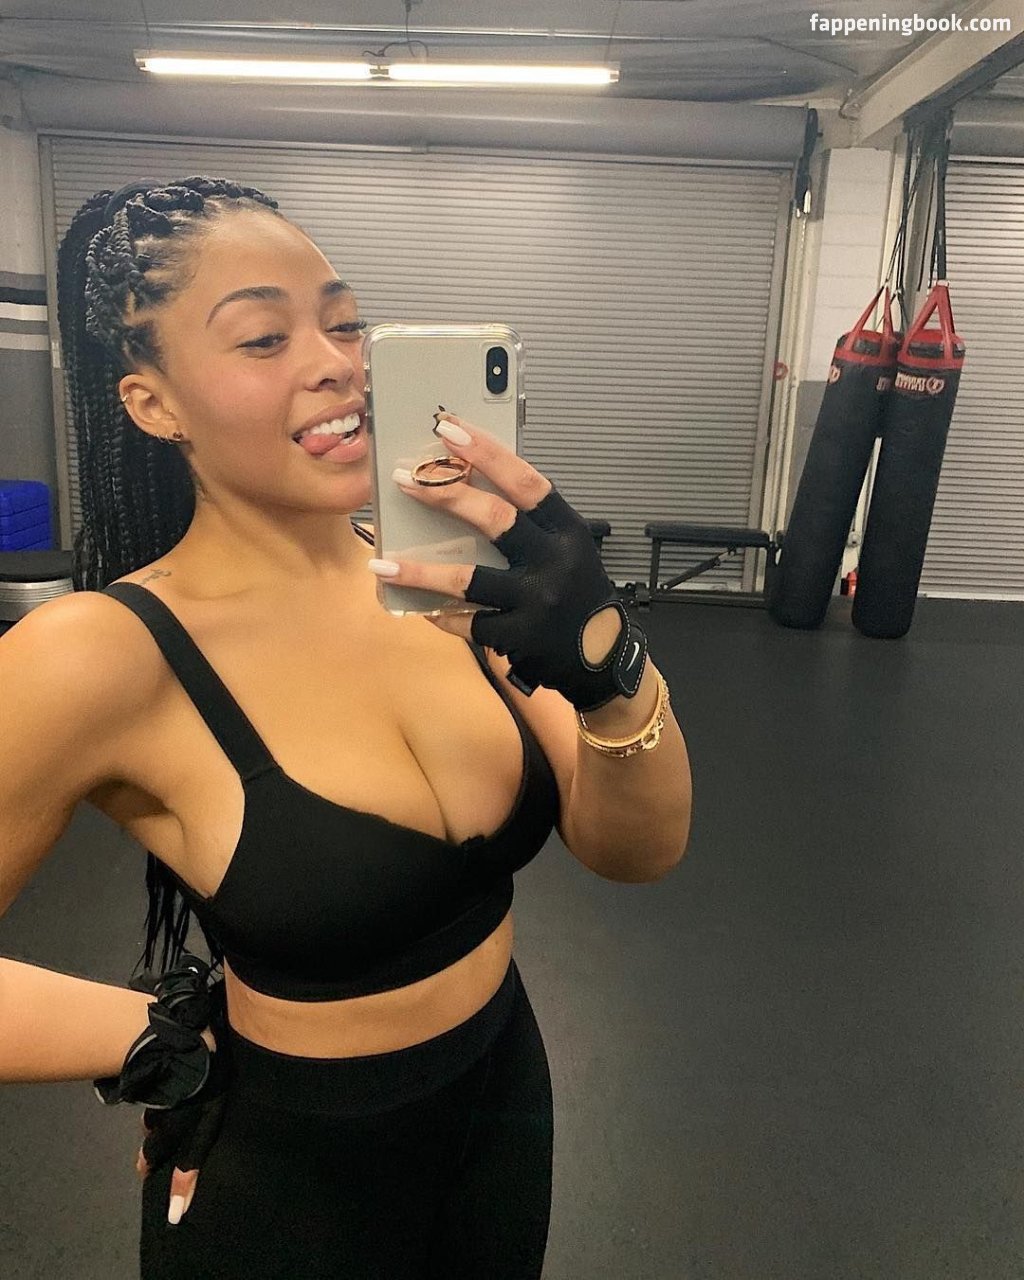 Jordyn Woods Nude, Sexy, The Fappening, Uncensored - Photo ...